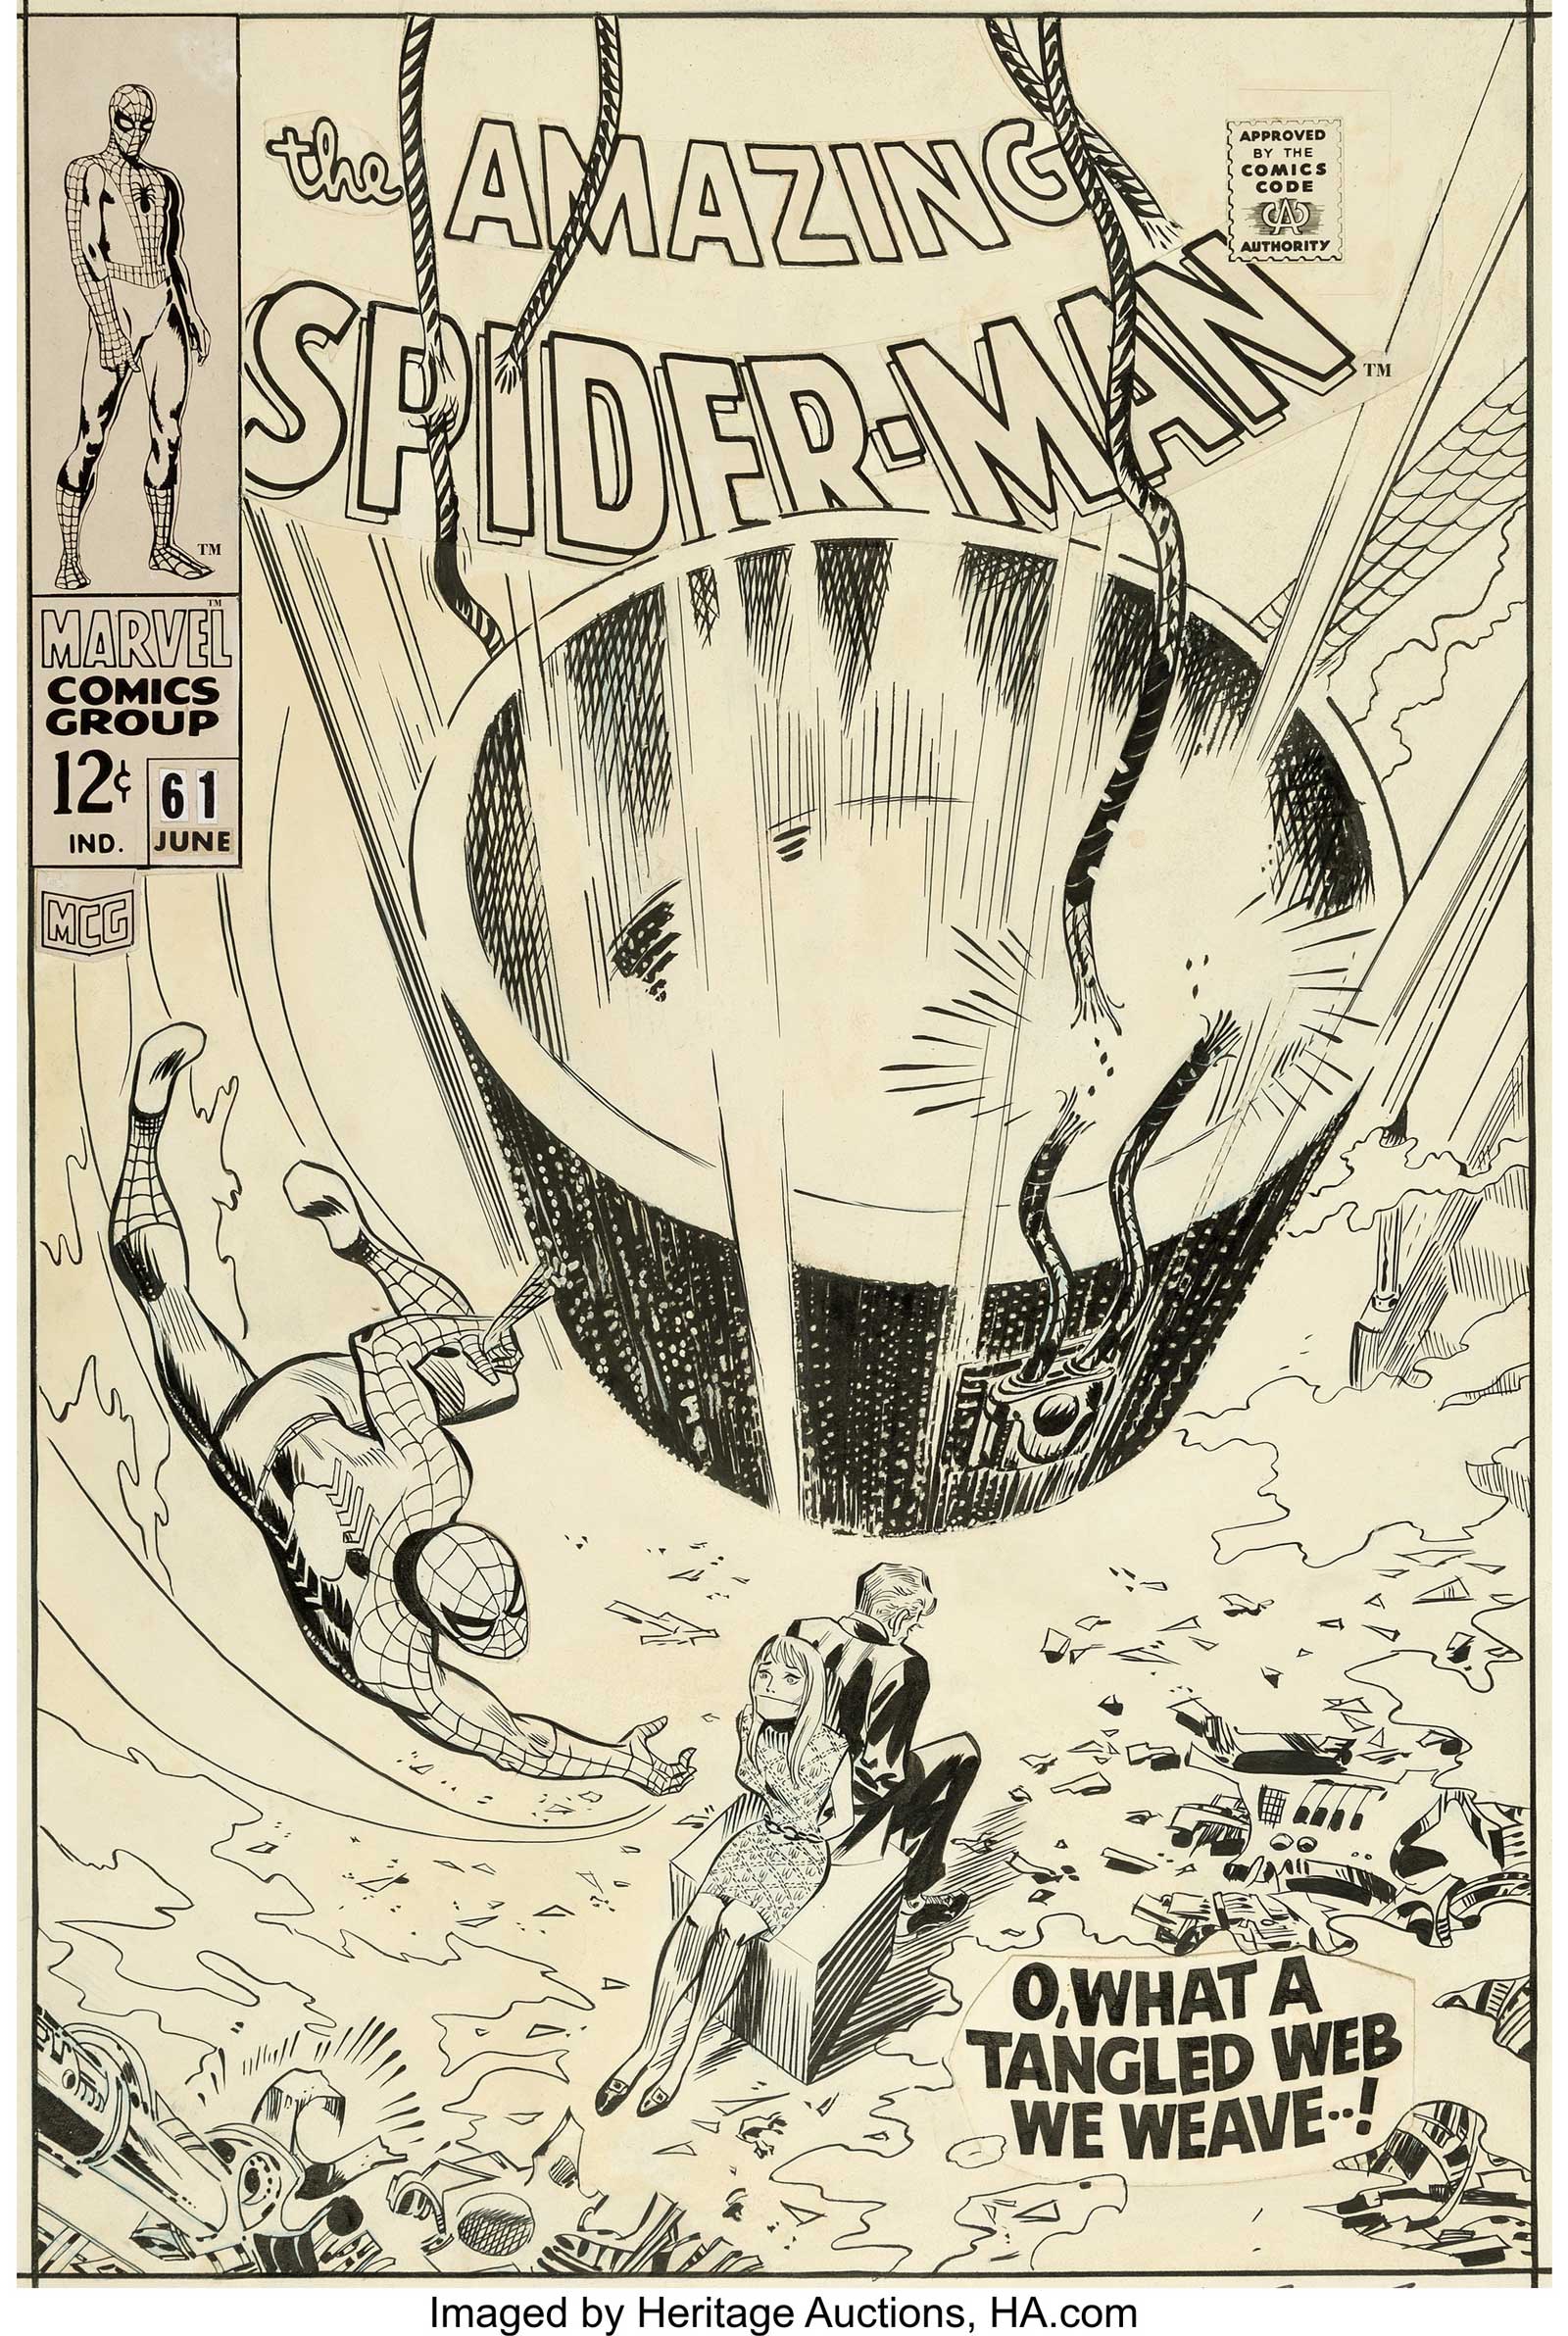 John Romita Sr. Amazing Spider-Man #61 Cover Original Art (Marvel, 1968). The first cover appearance for Gwen Stacy as well as her father Captain George Stacy